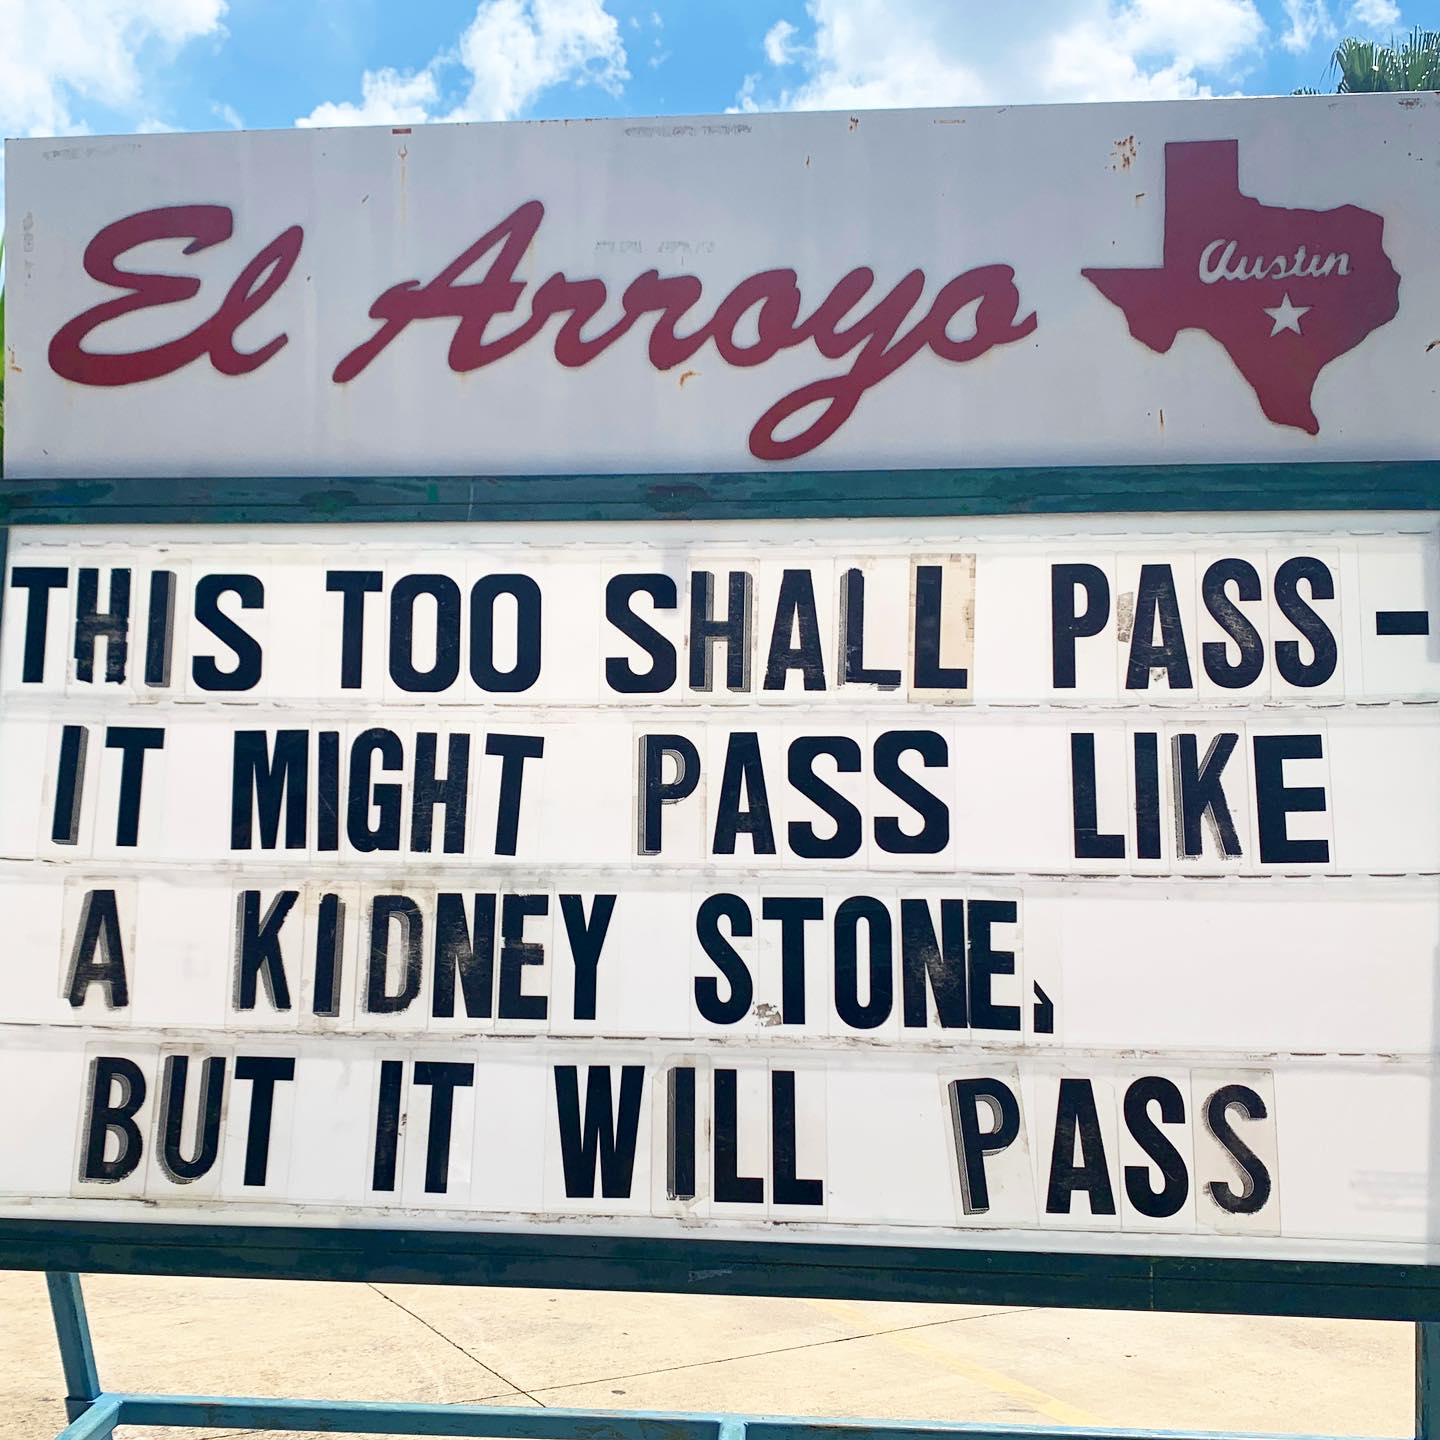 this too shall pass - it might pass like a kidney stone, but it will pass